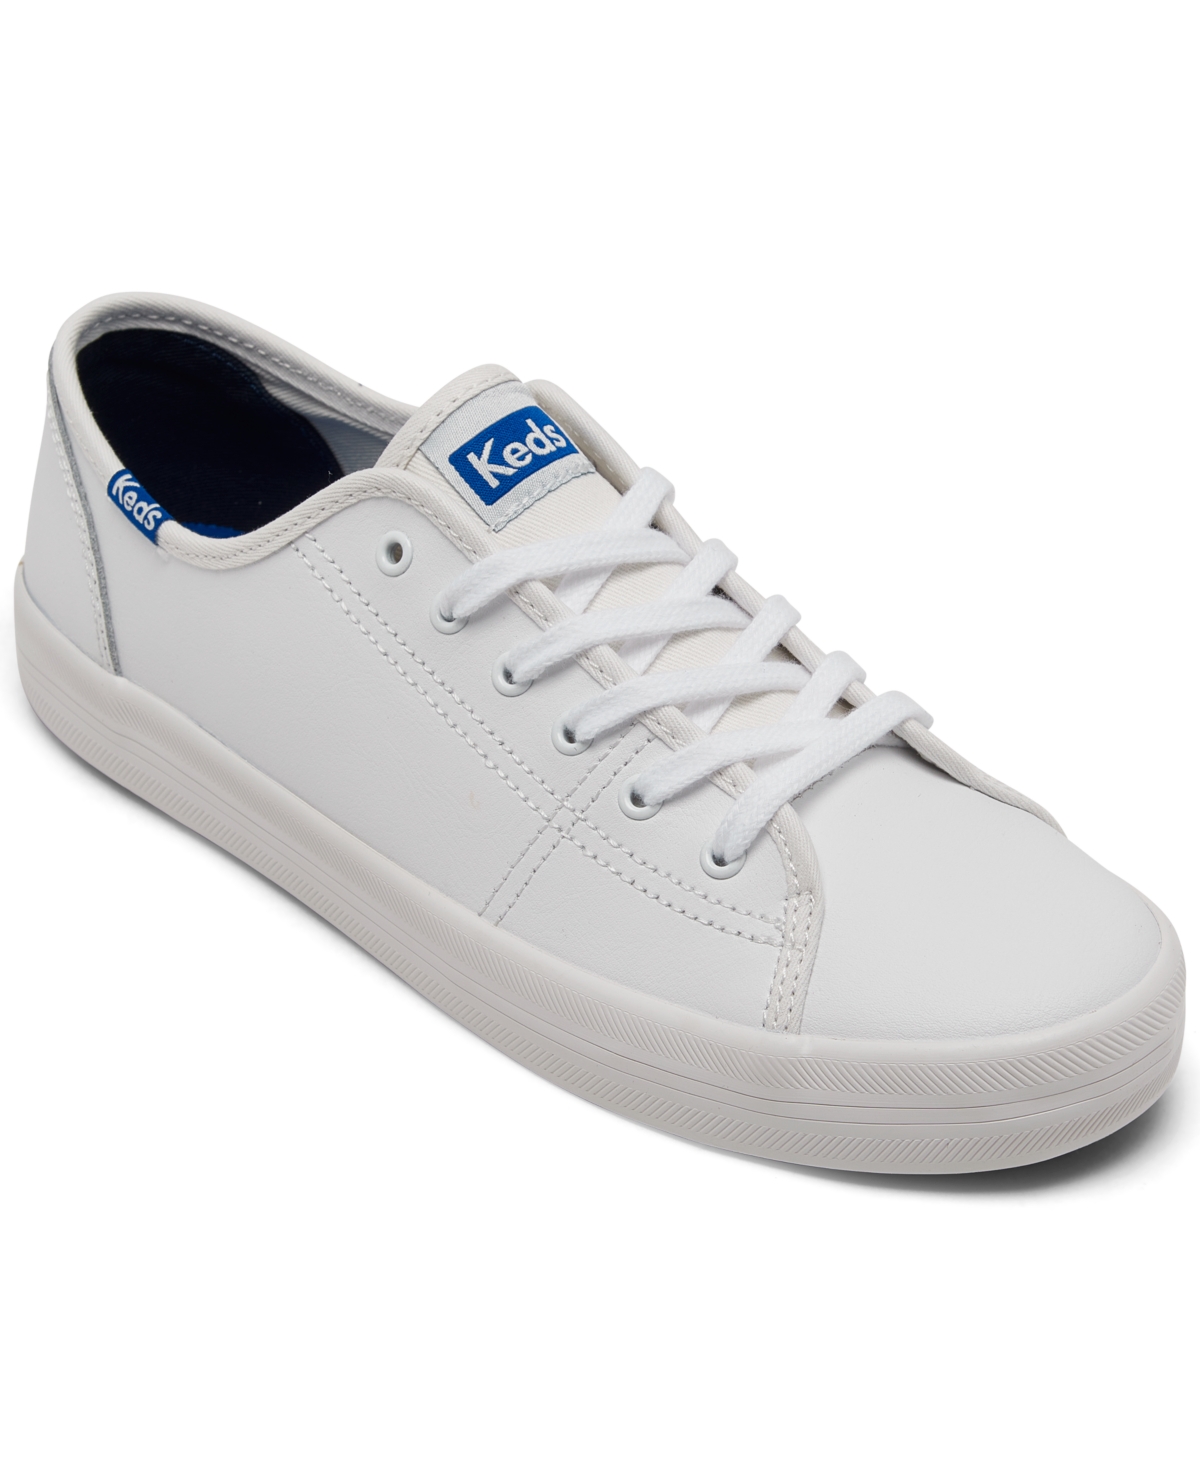 Keds Women's Kickstart Leather Casual Sneakers from Finish Line